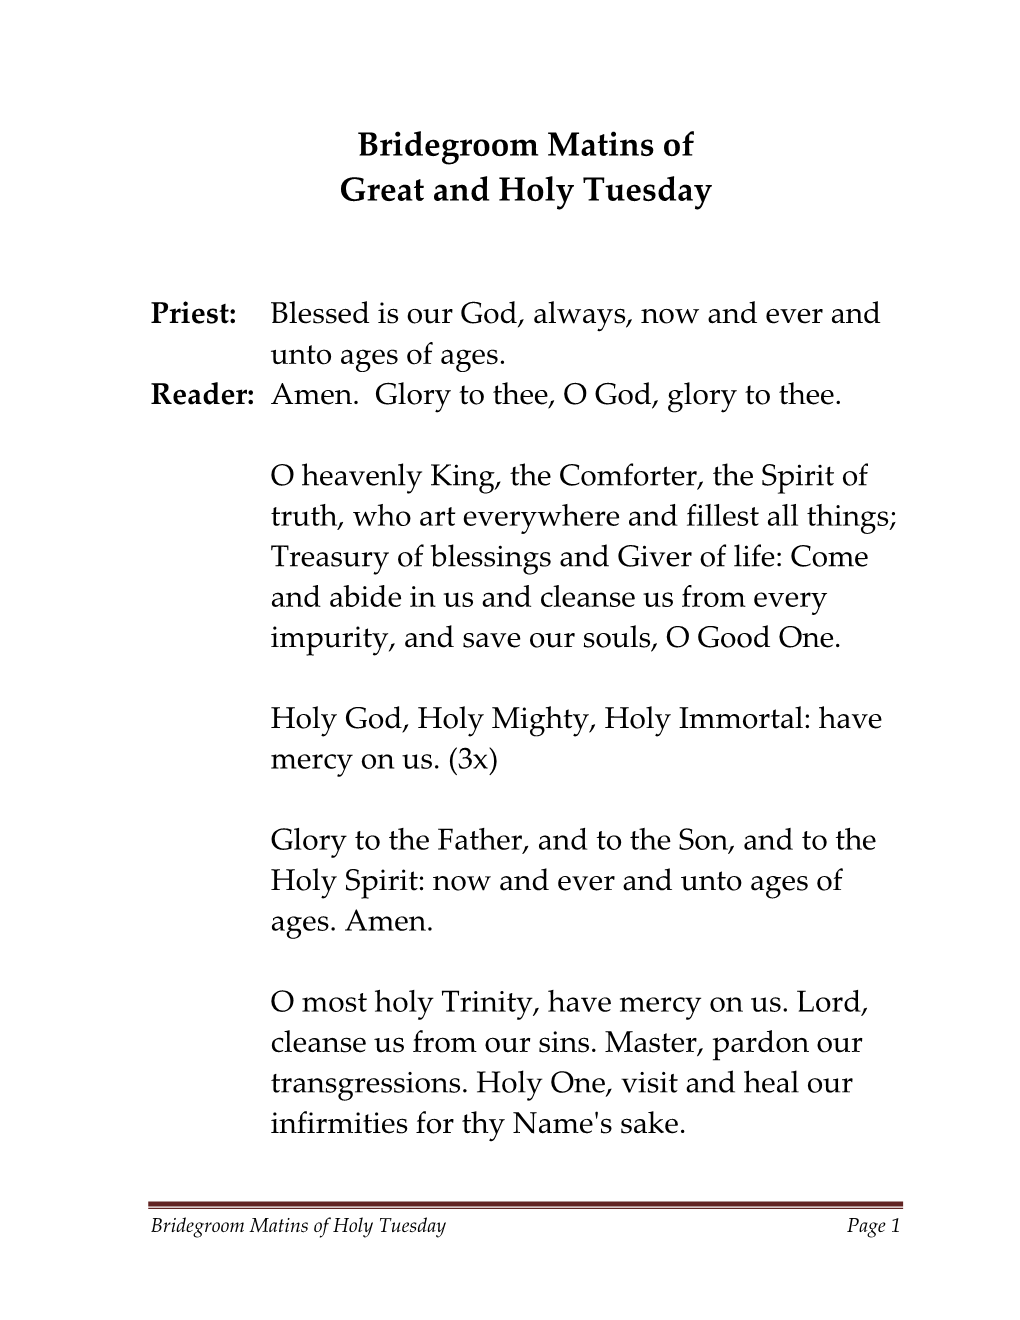 Bridegroom Matins of Holy Tuesday Page 1